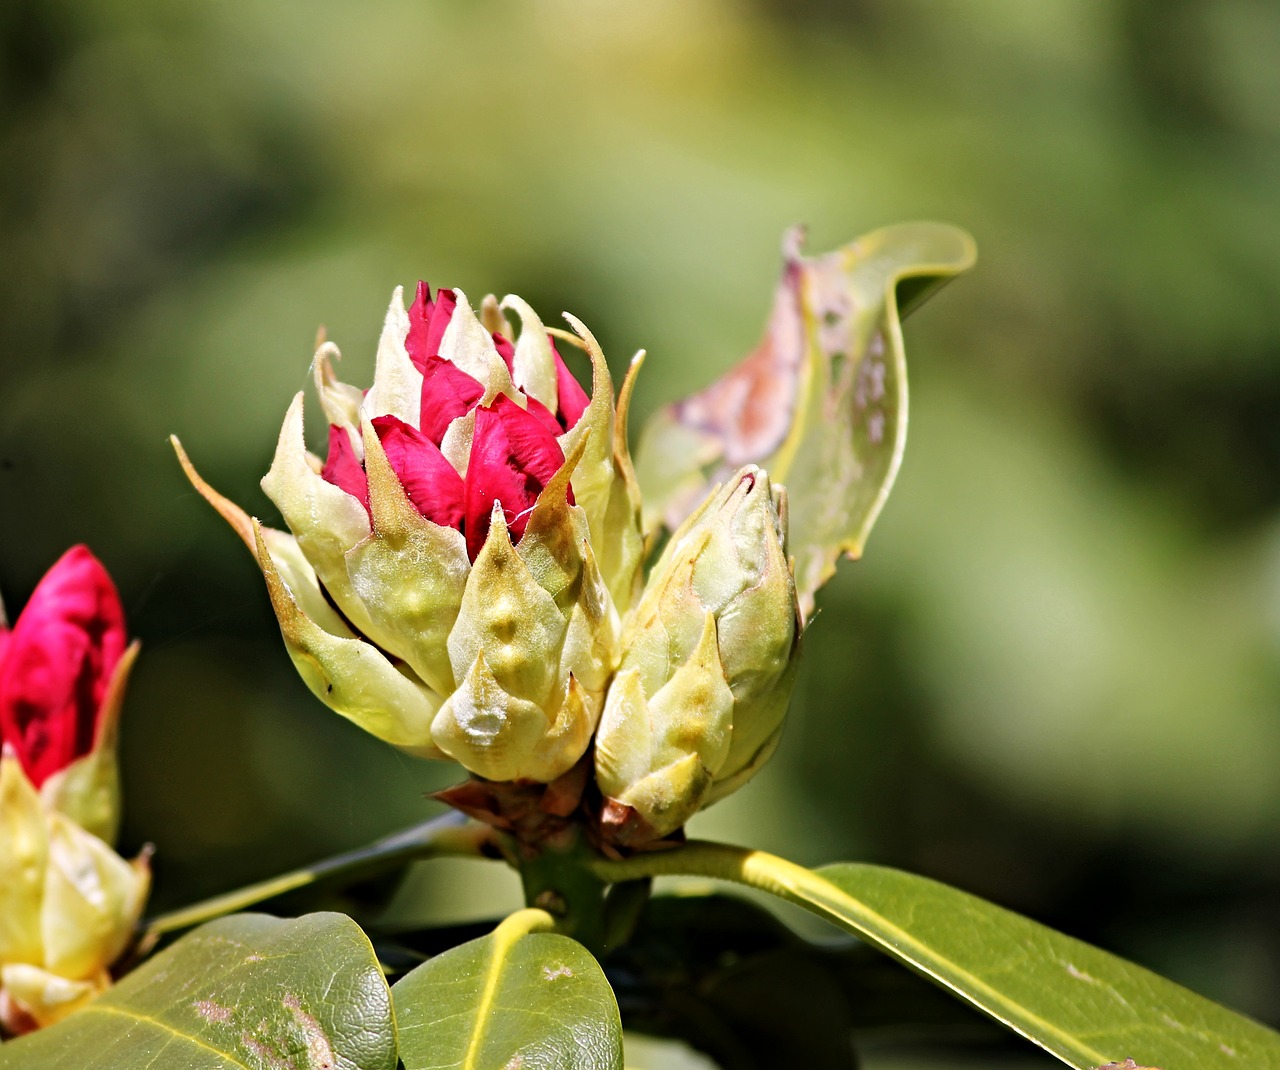 bud rhododendron flower bud free photo